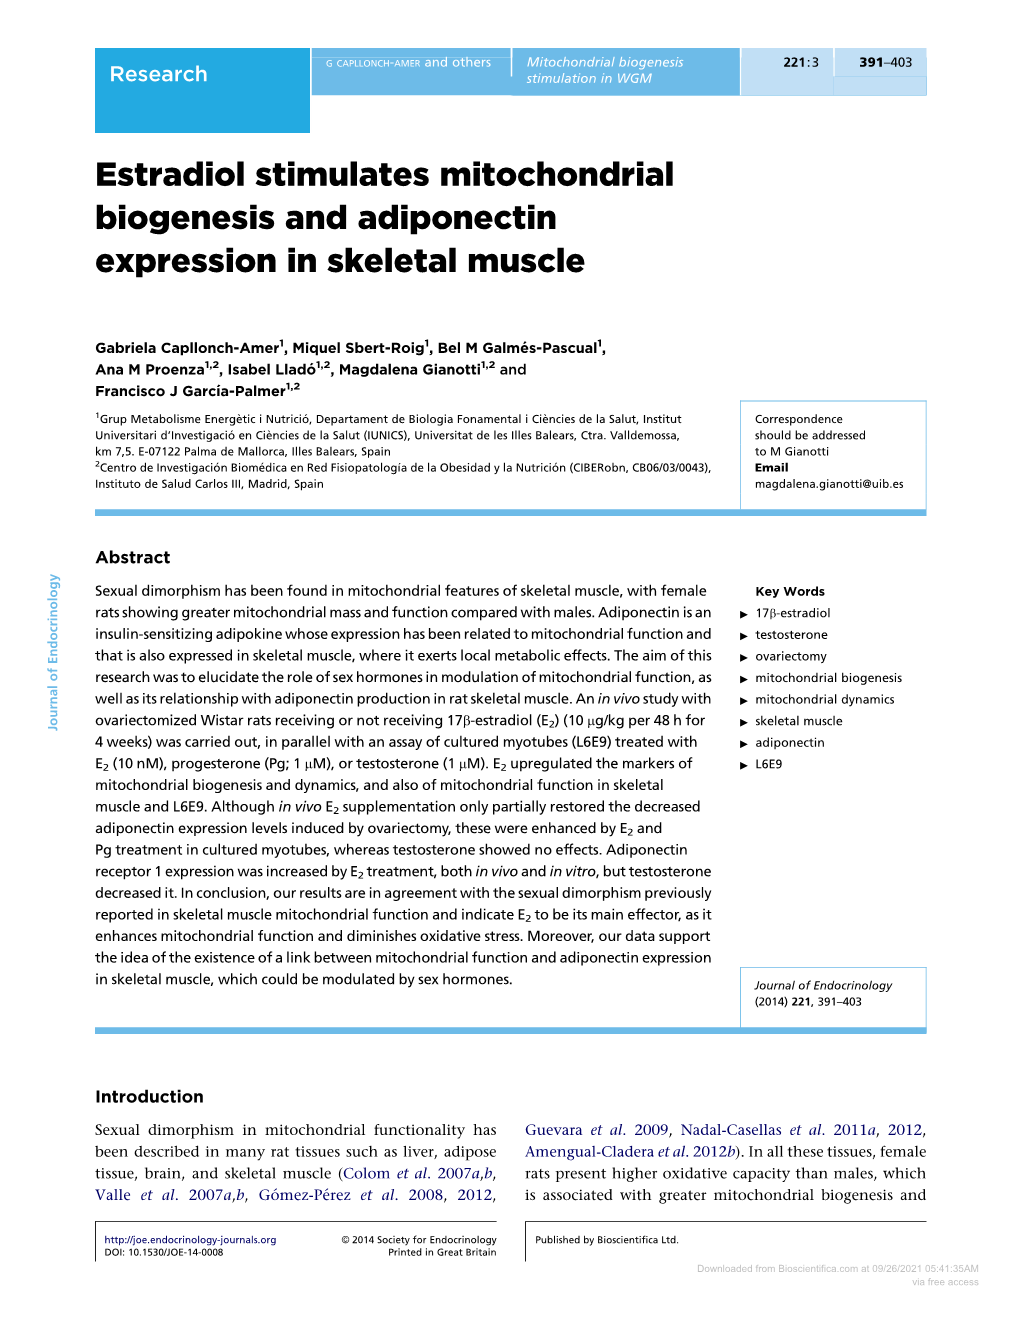 Estradiol Stimulates Mitochondrial Biogenesis and Adiponectin Expression in Skeletal Muscle